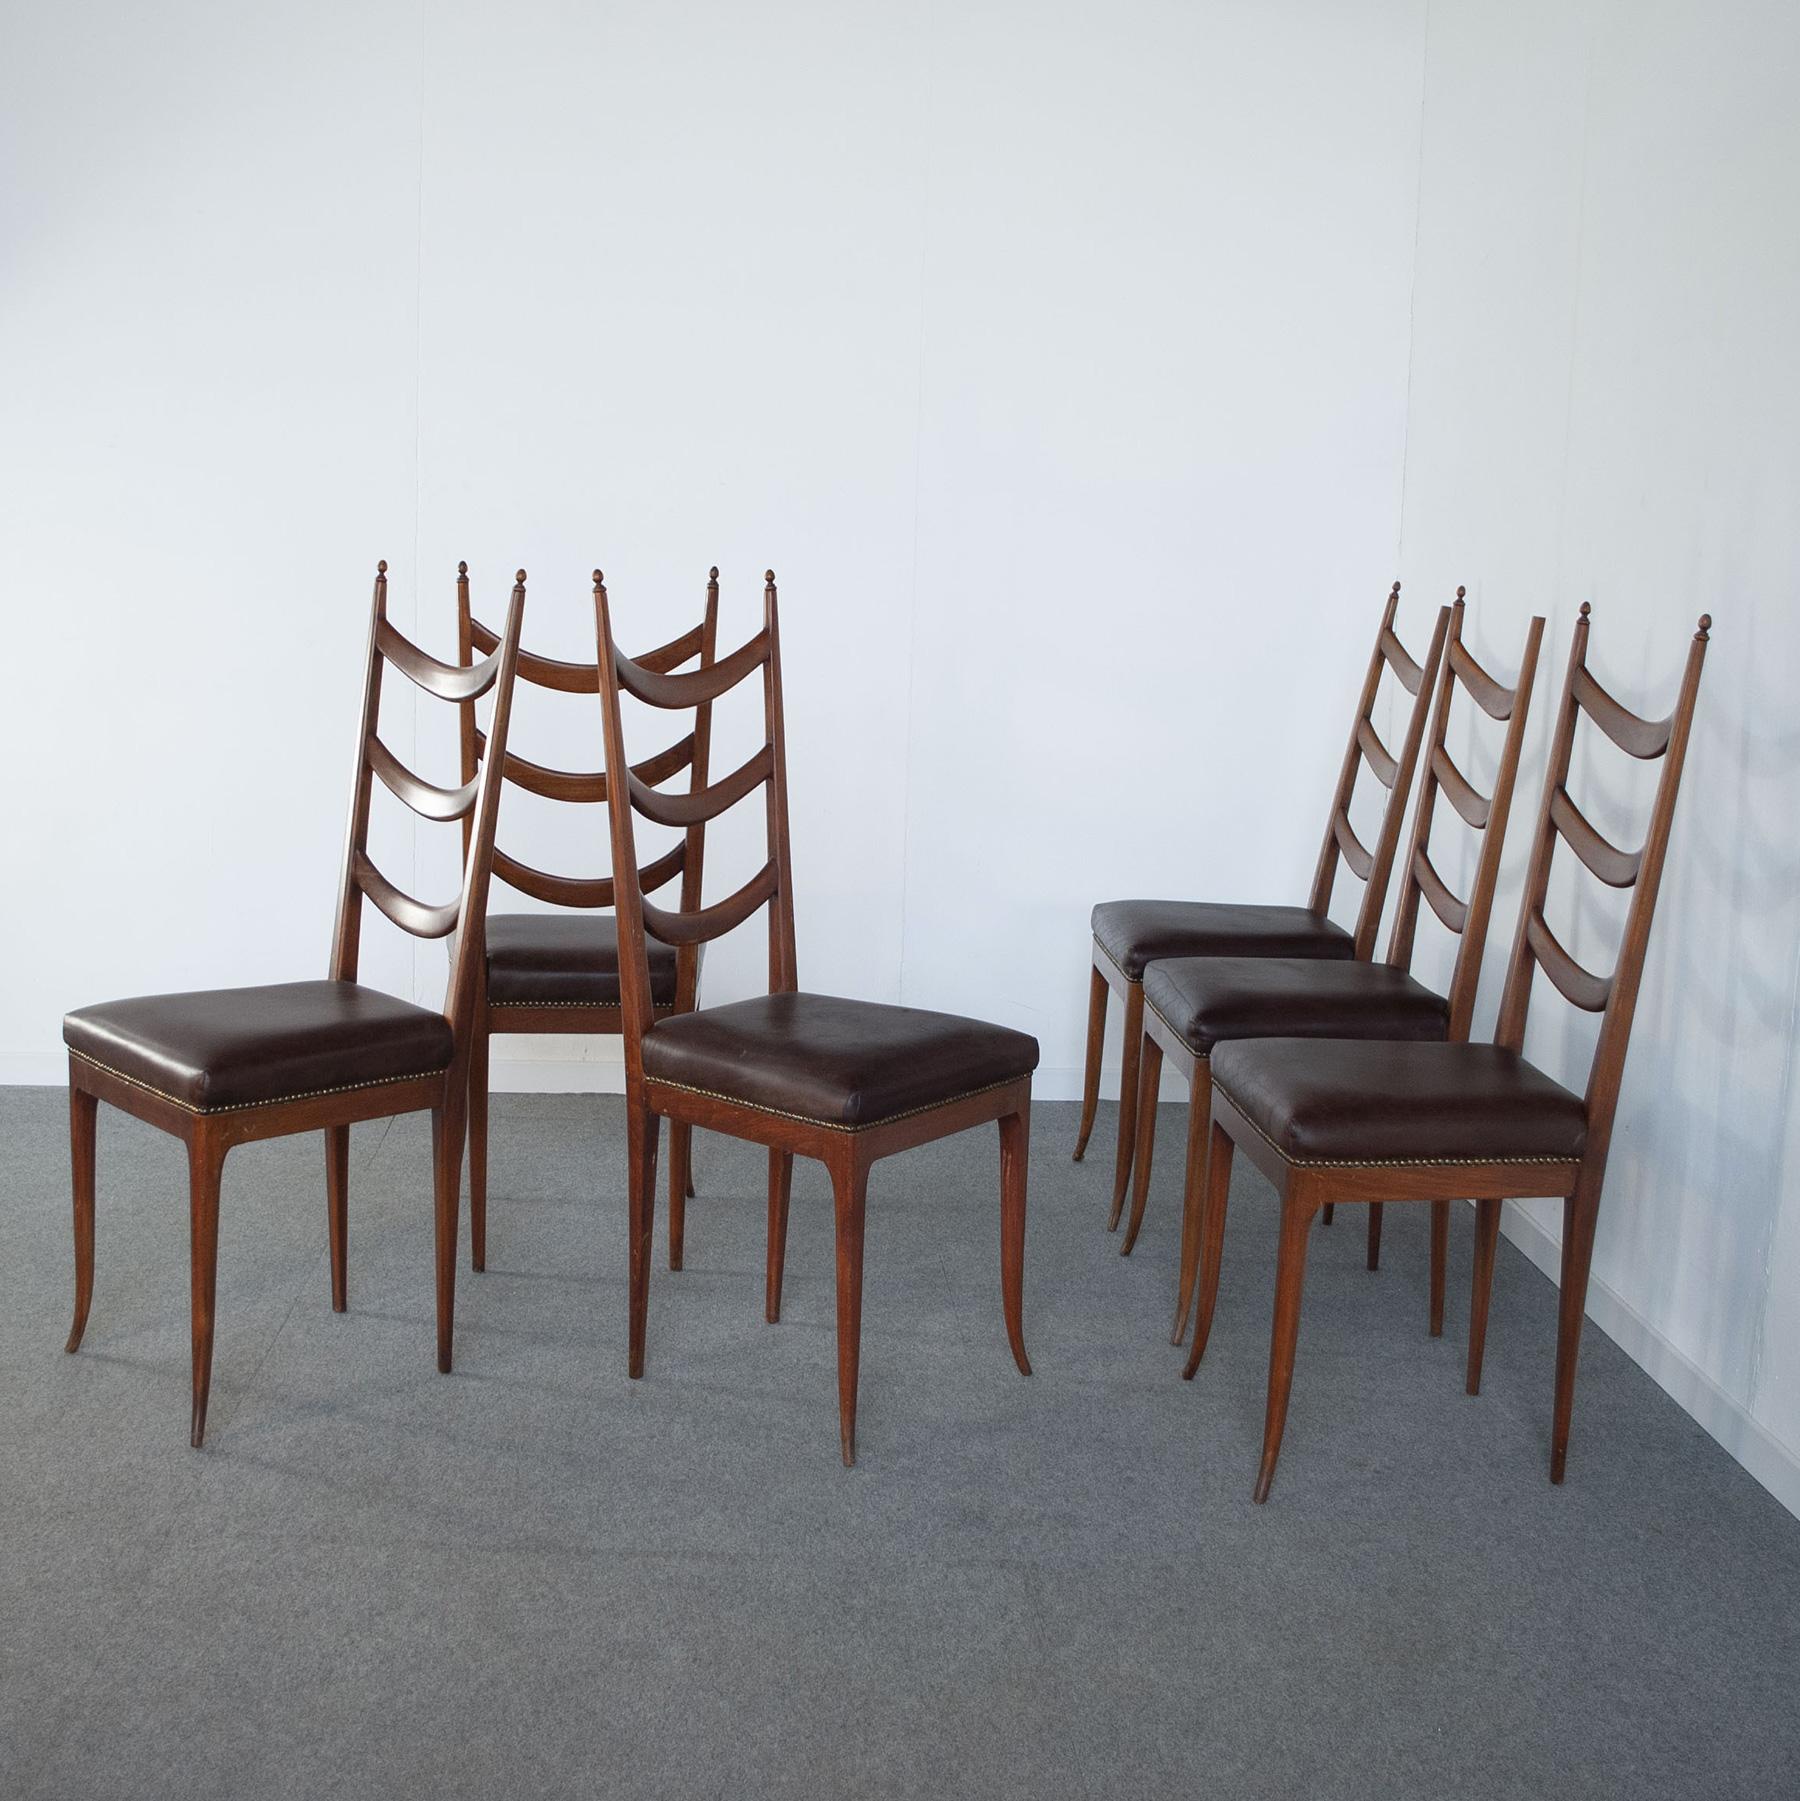 Elegant set consisting of six chairs with seat in vim leather and wooden structure with slender backrest, attributable to Osvaldo Borsani Italian production late 1950s.